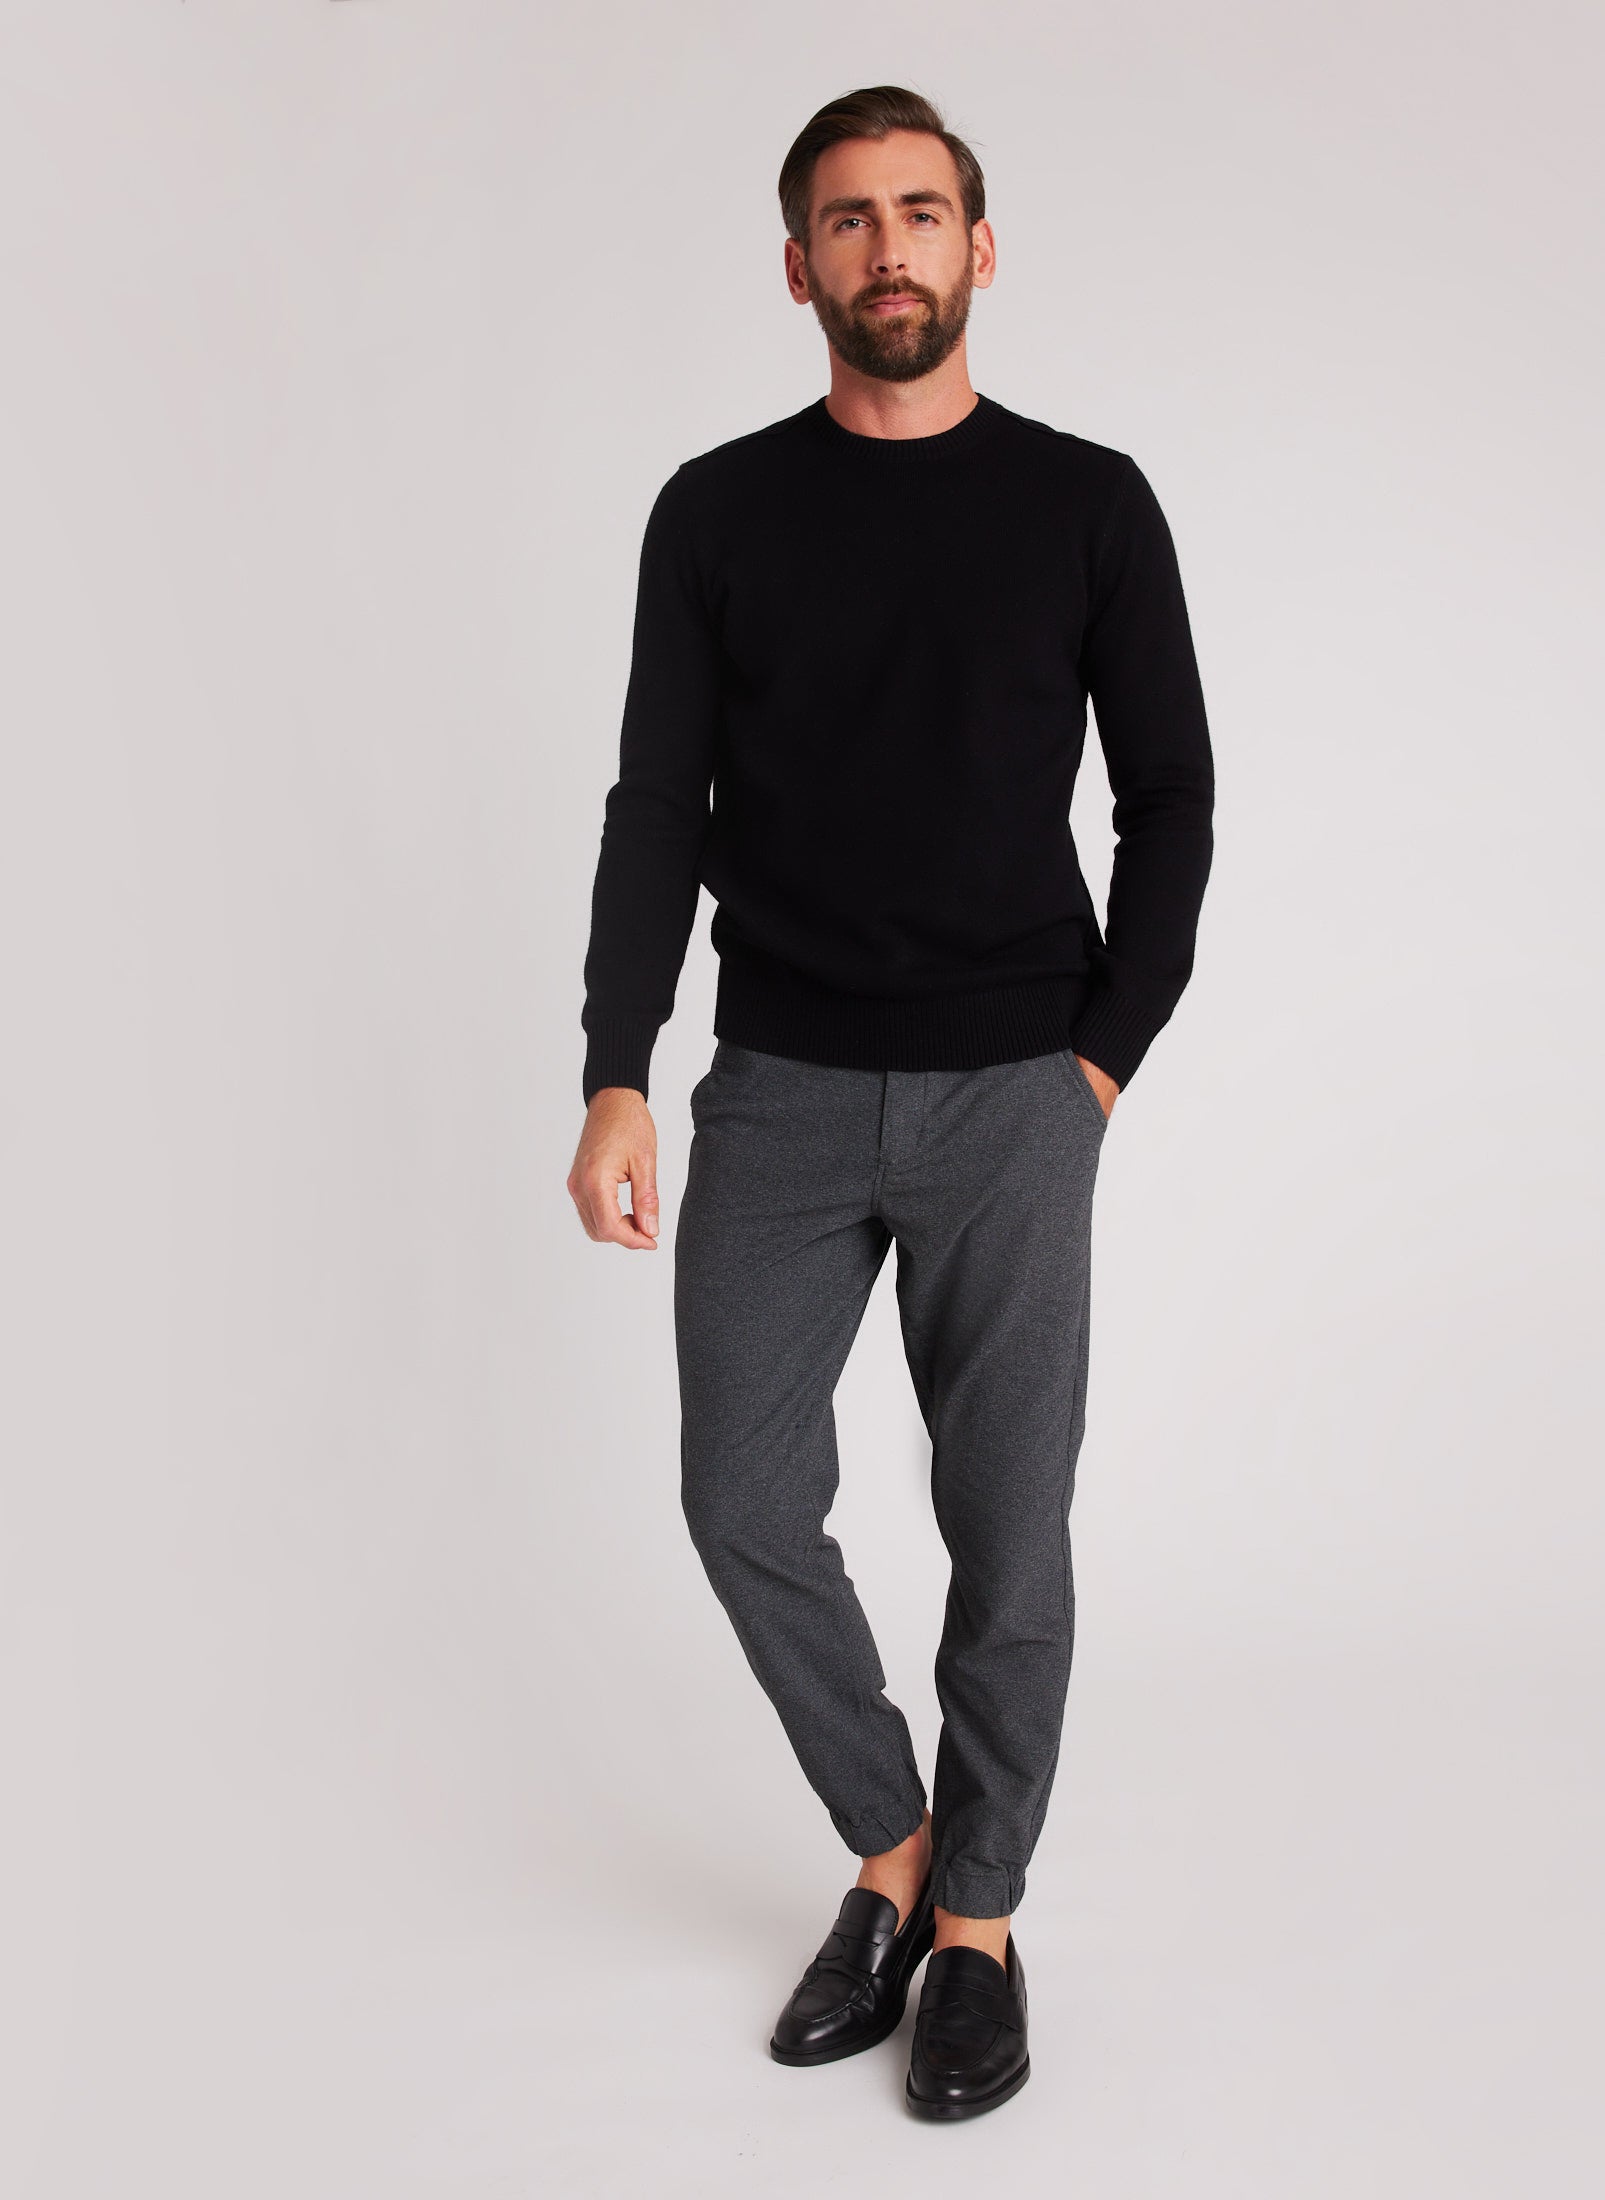 Kit and Ace — Stride Winter Joggers Standard Fit